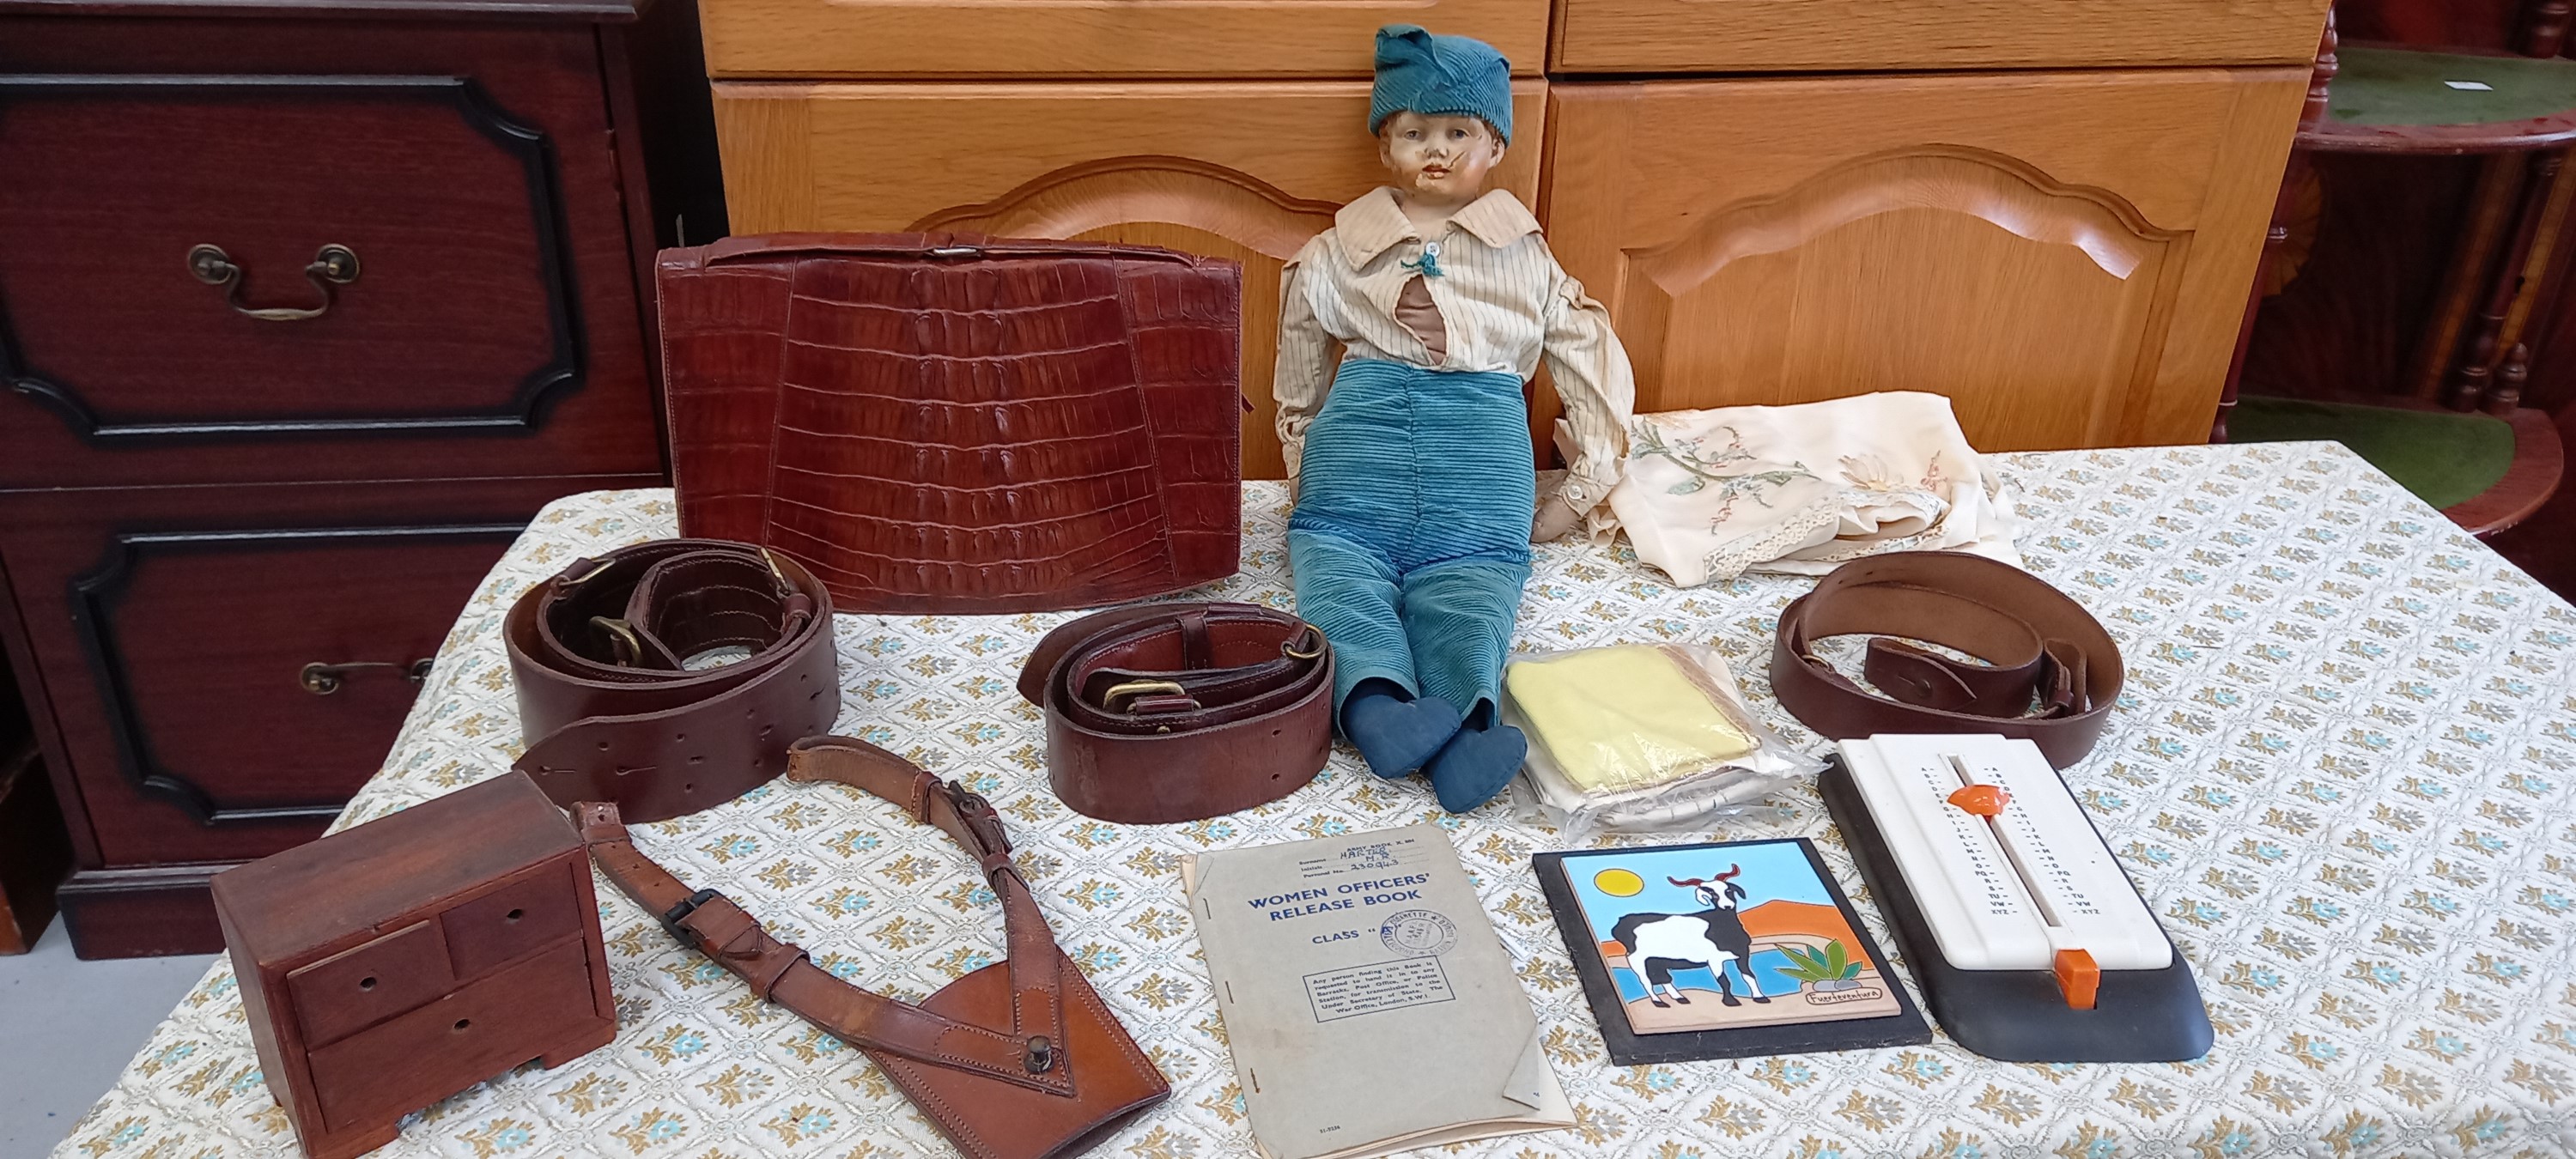 A crocodile skin handbag, a doll with a ceramic head, a gunsliner leather belt and other leather